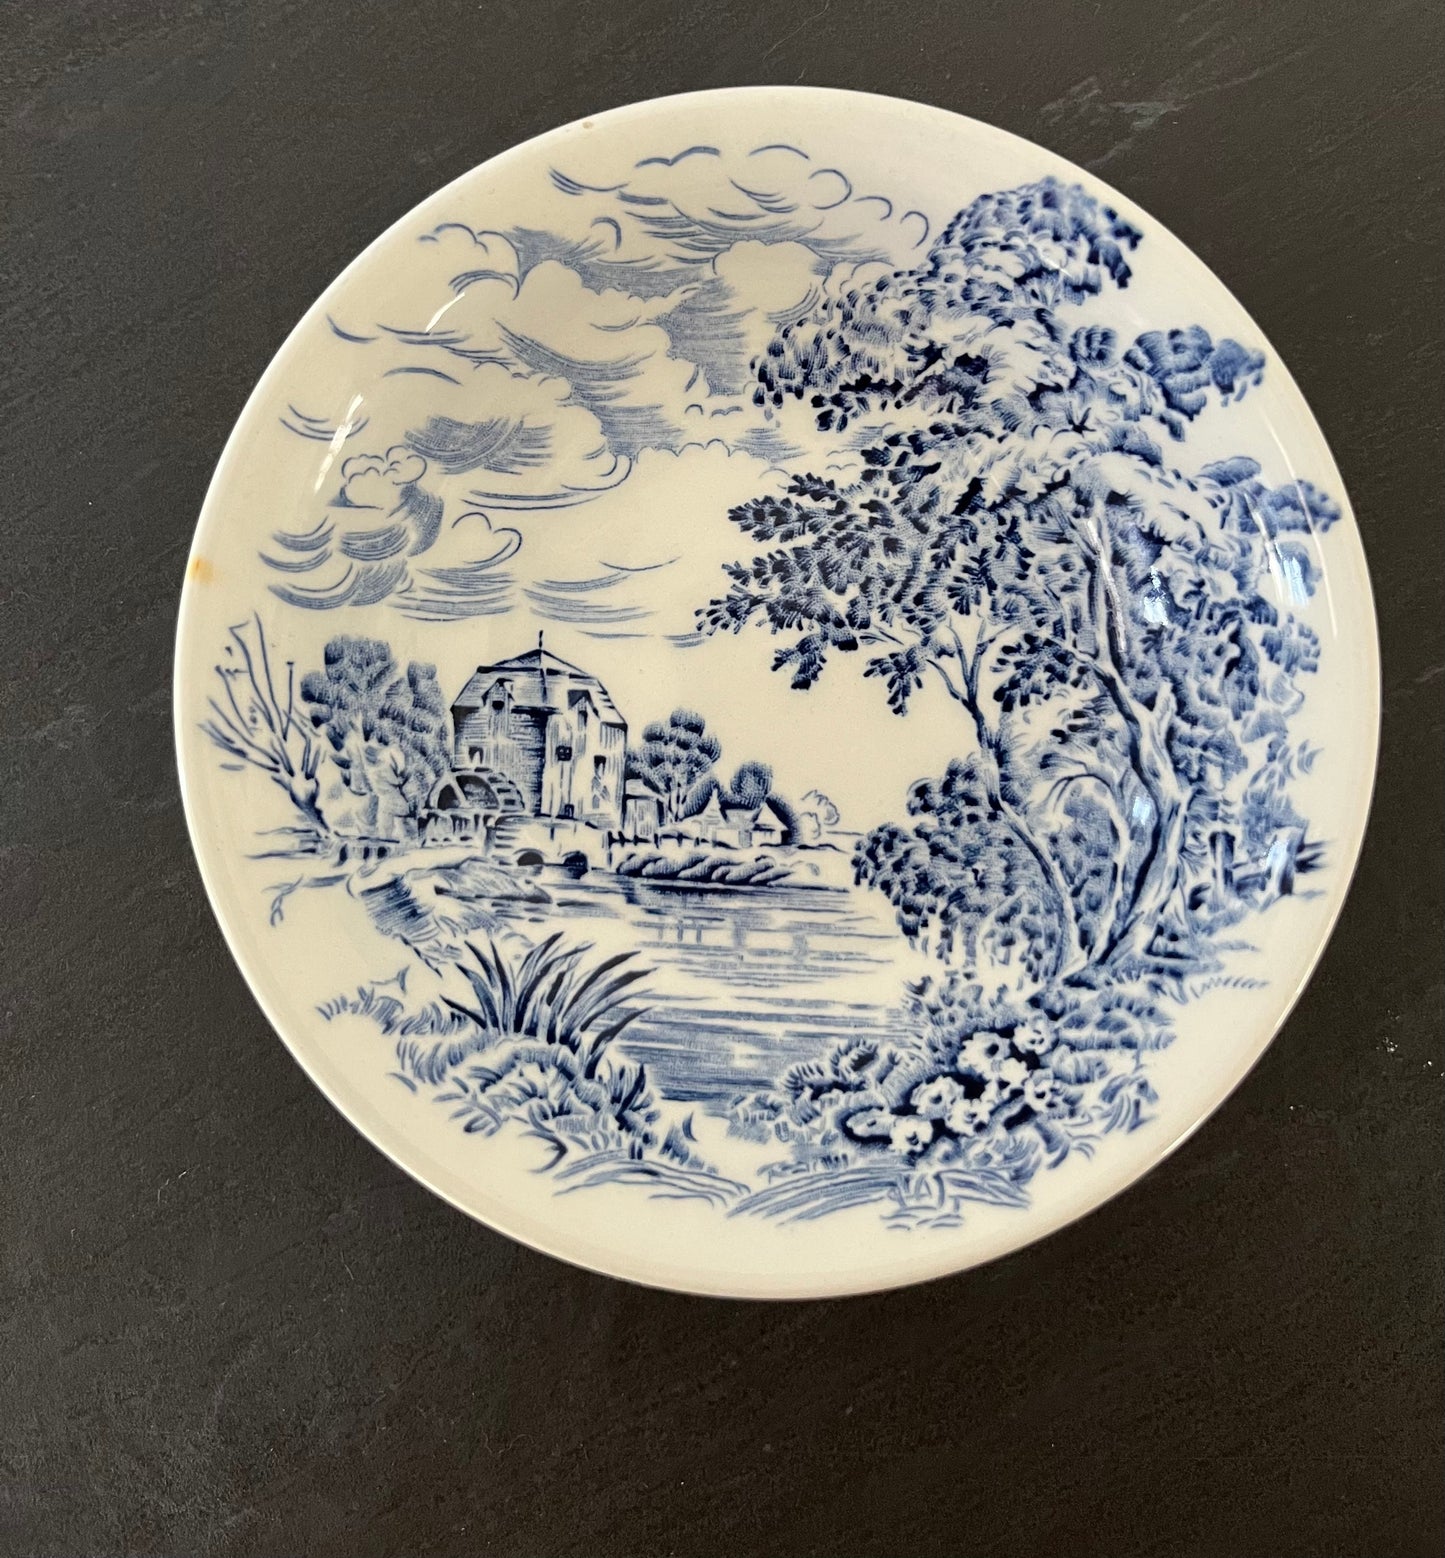 Grandmillennial Style Vintage 1966-1968 Wedgwood Countryside Blue and White Fruit Dessert Butter Sauce Small Bowl - Classic Elegance in Collectible Tableware